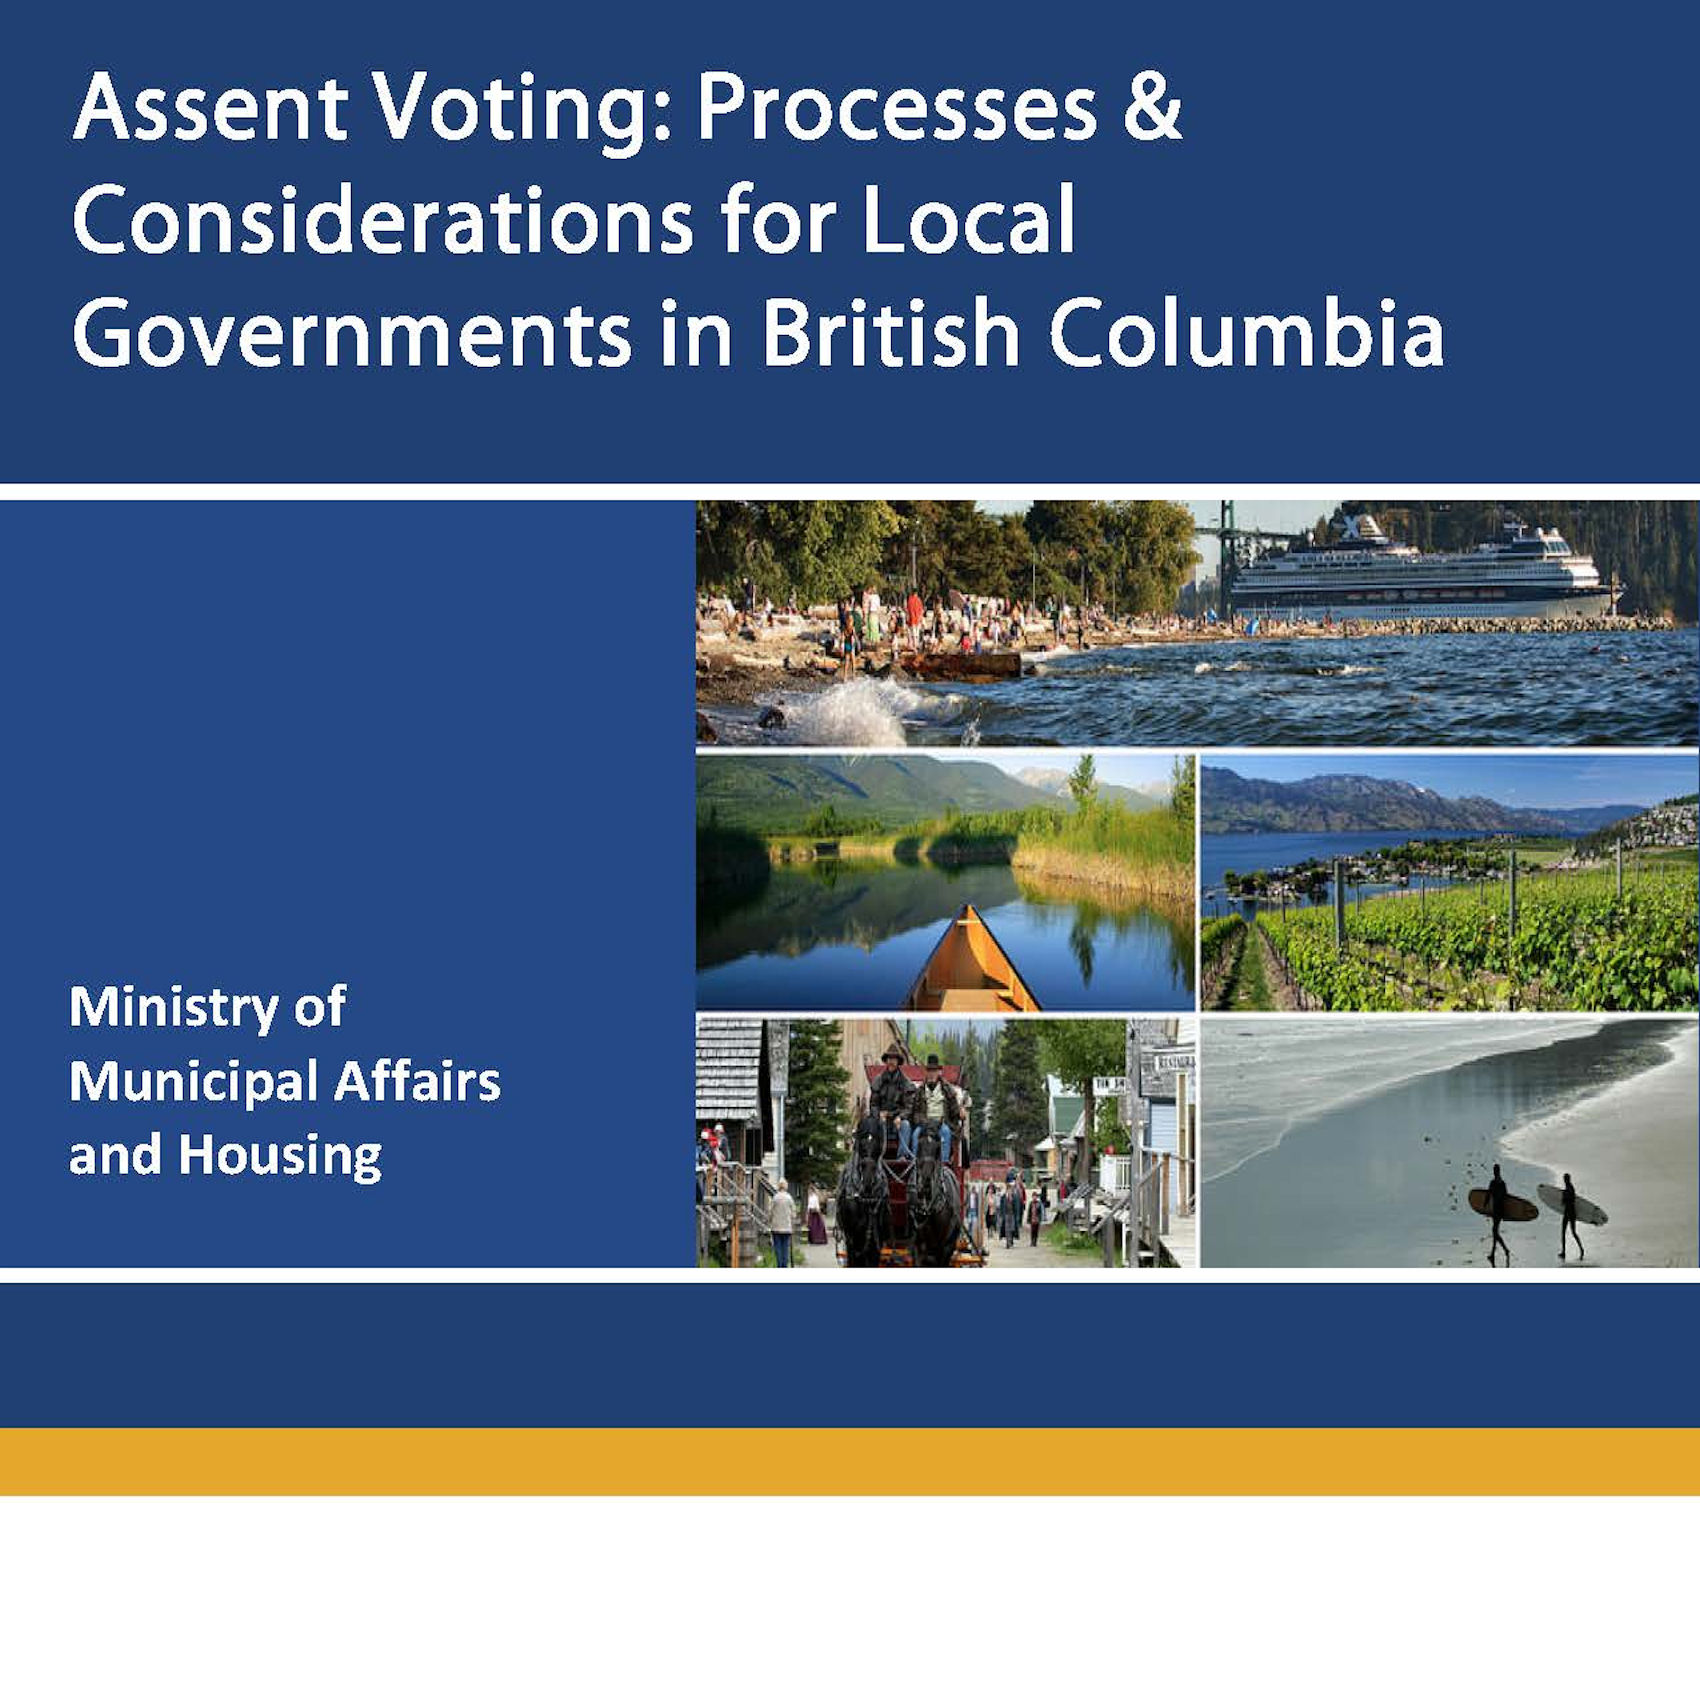 Download the Assent Voting Best Practices Guide